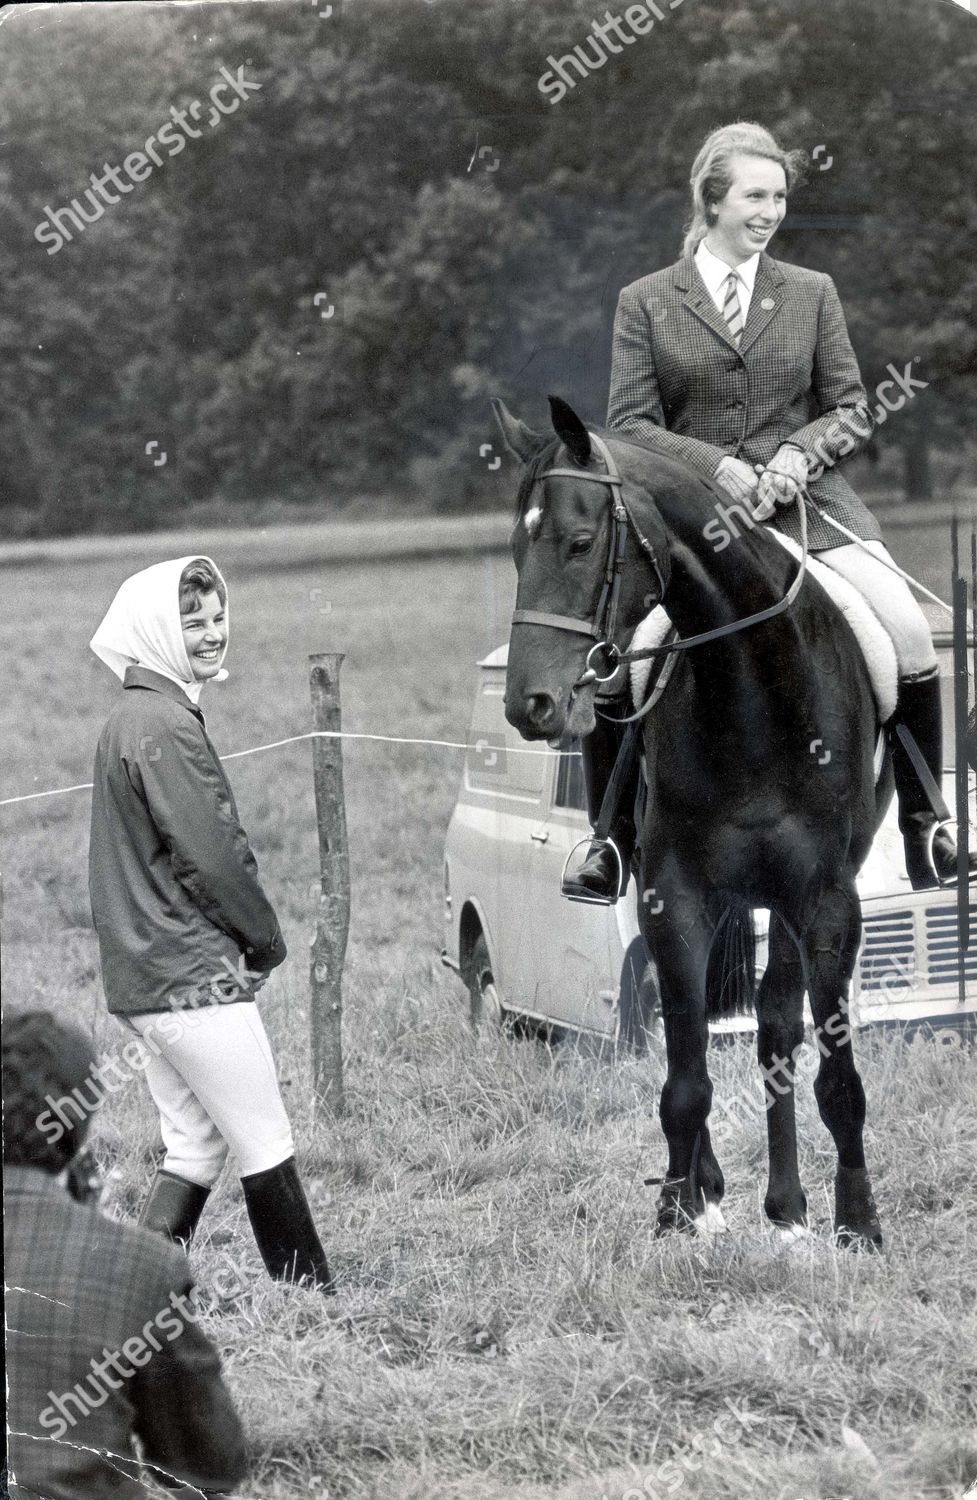 princess-anne-now-princess-royal-august-1968-when-prince-charles-takes-flying-sister-anne-has-her-own-ideas-of-a-sporting-future-feet-set-firmly-in-the-stirrups-an-assured-hold-on-the-reins-she-follows-in-her-mothers-footsteps-with-her-love-of-r-shutterstock-editorial-895528a.jpg